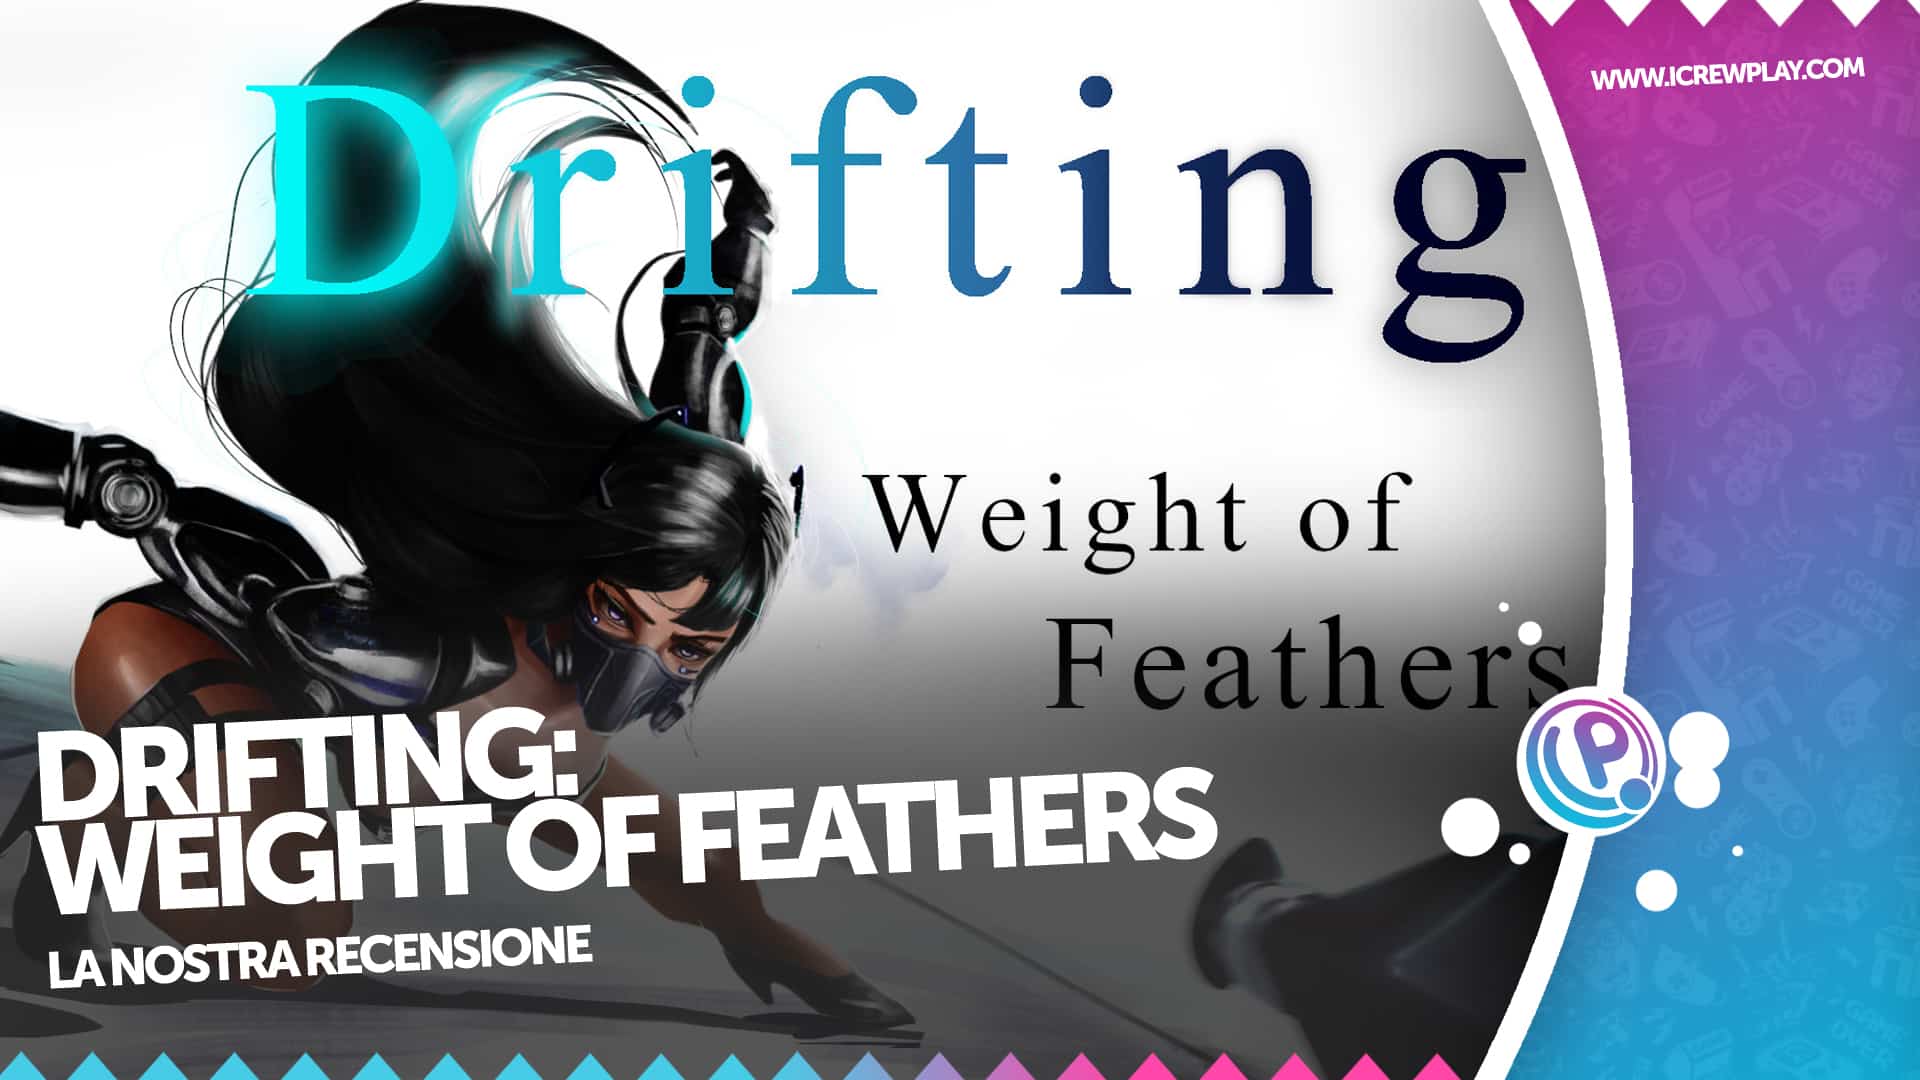 Drifting: Weigth of Feathers cover recensione